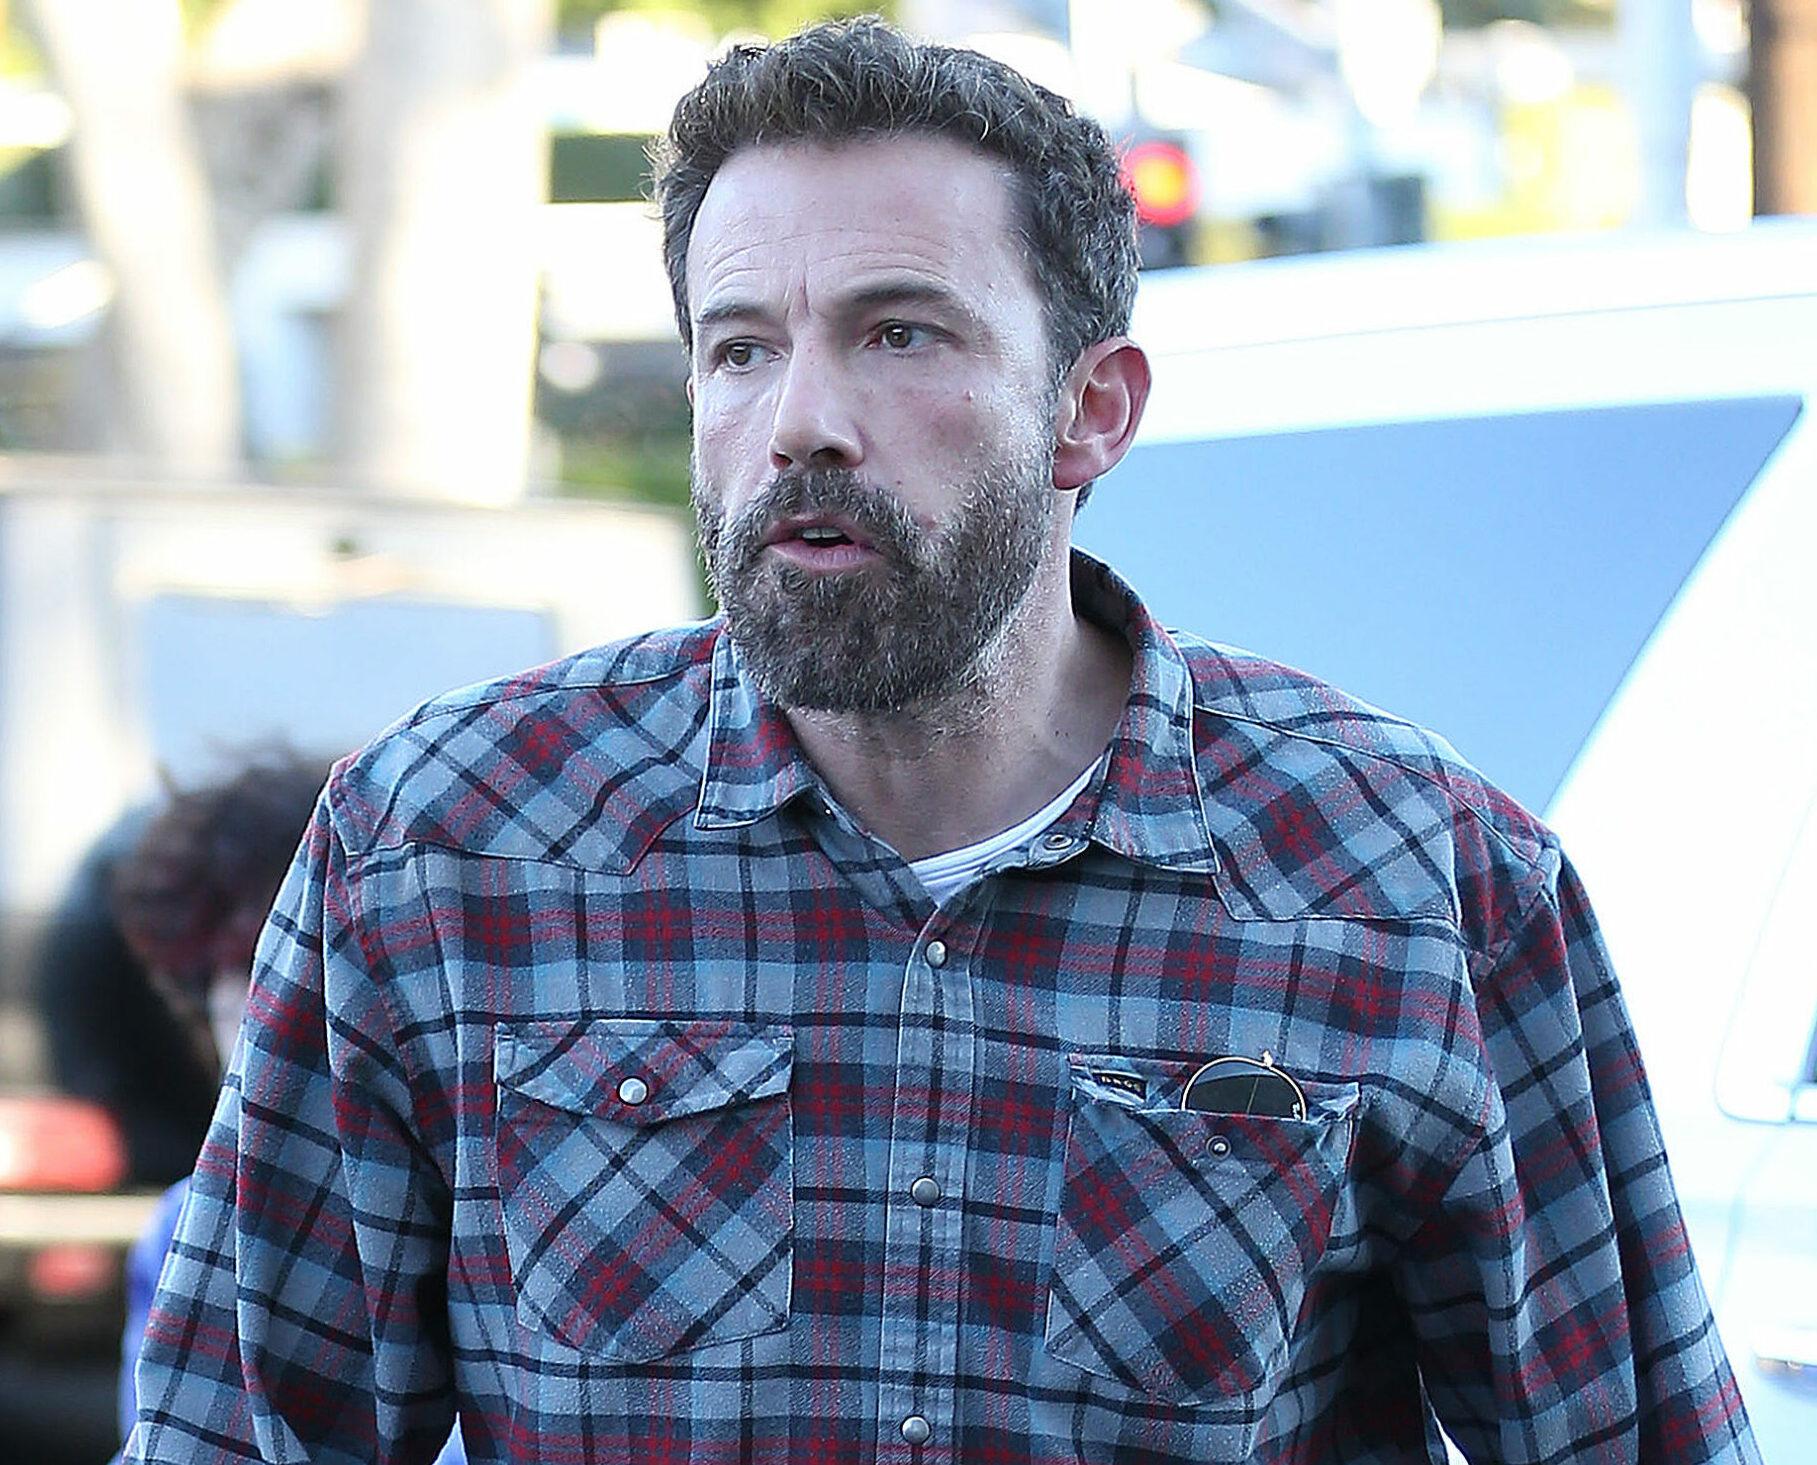 Ben Affleck part ways with Jennifer Lopez as she went shopping on Rodeo Drive while he takes his children out to eat in Santa Monica